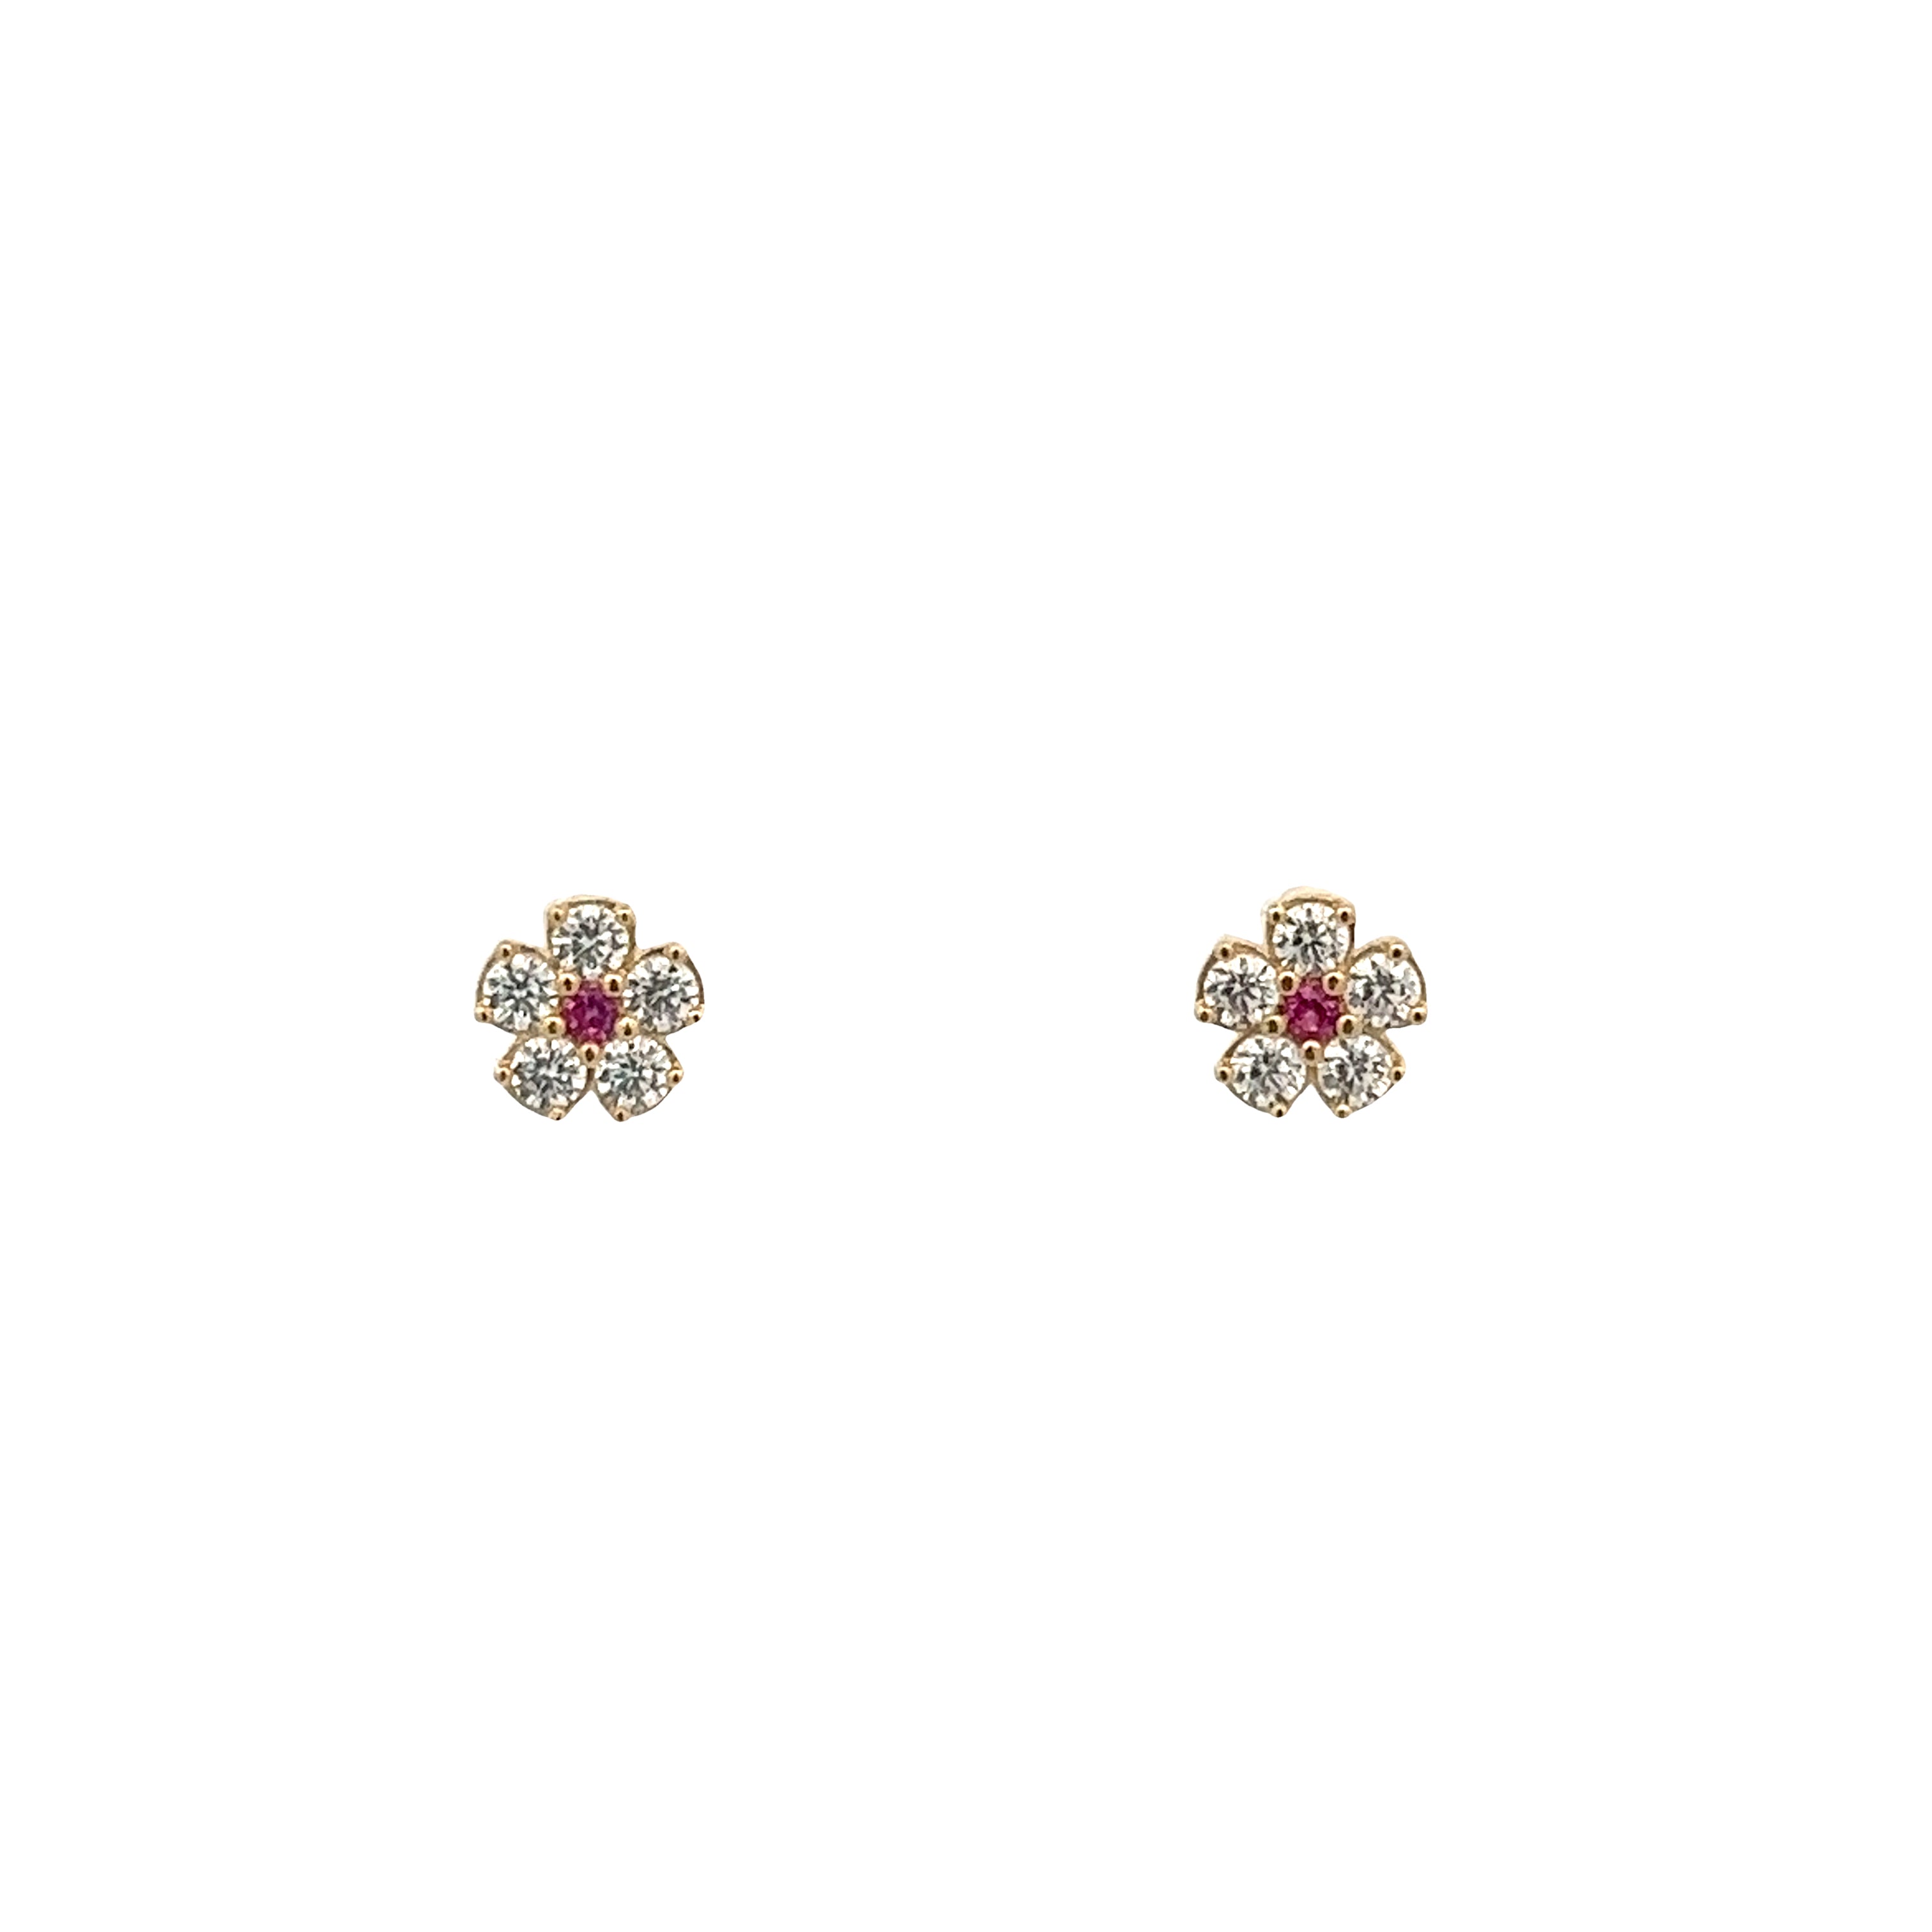 14K GOLD FLOWER WITH RED CRYSTALS EARRINGS